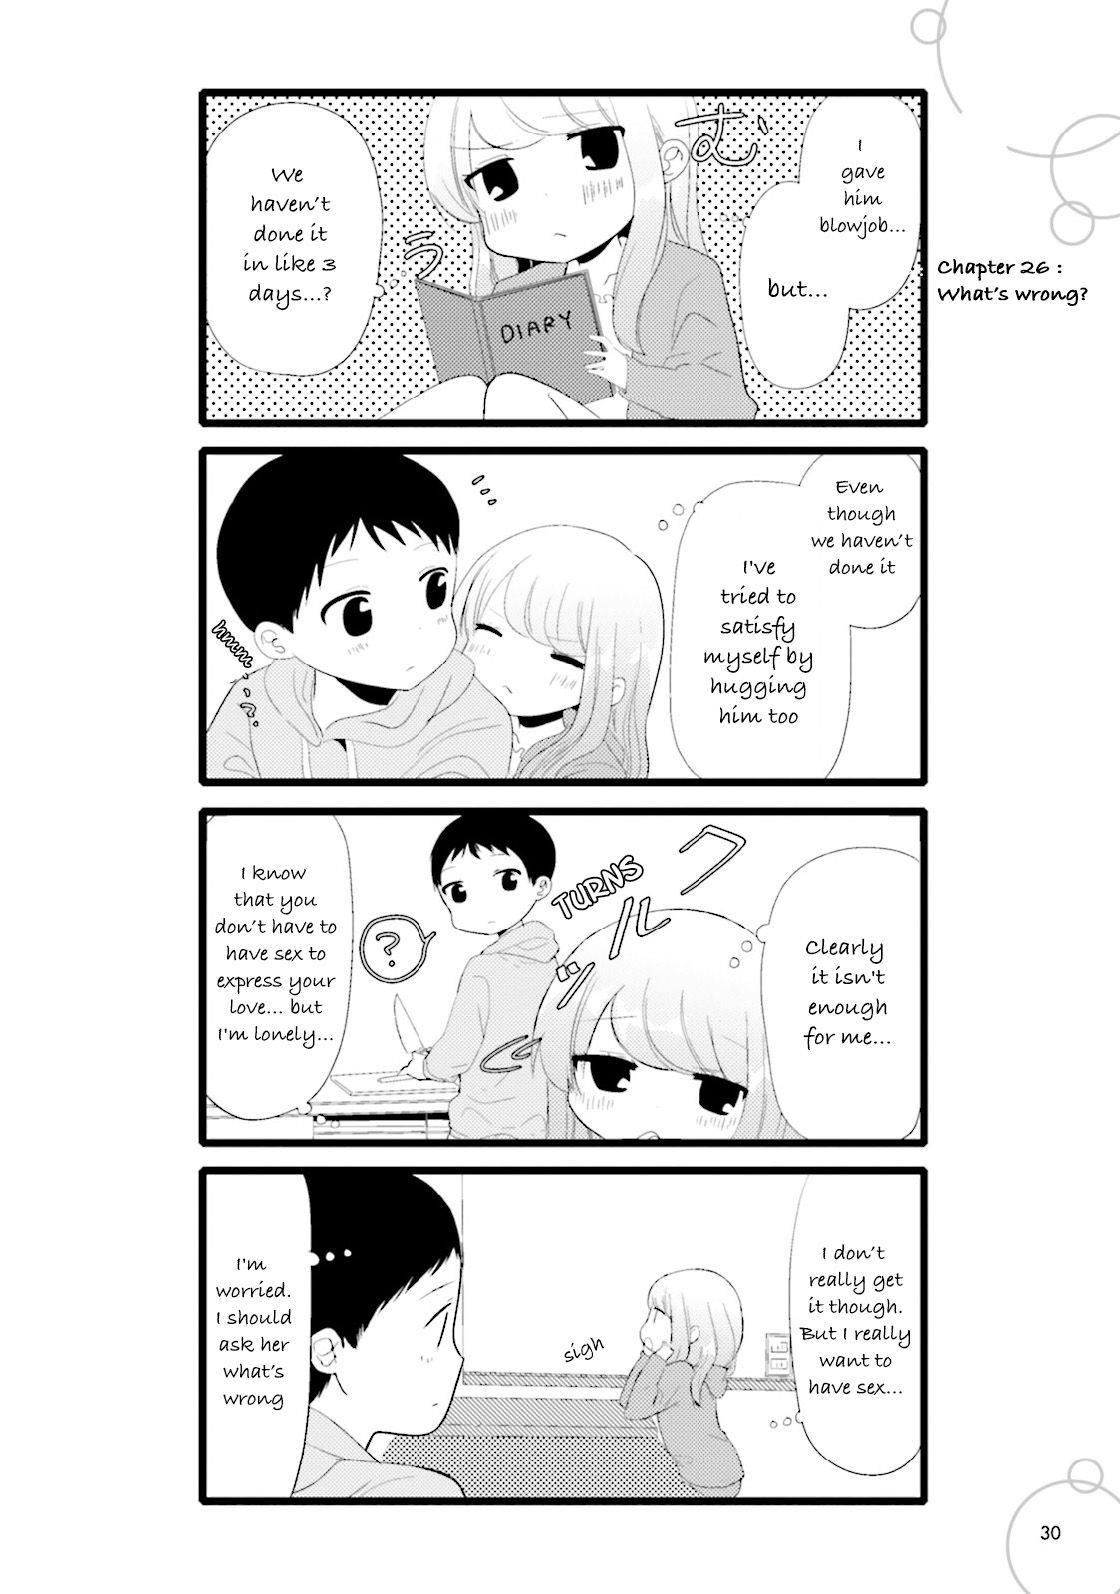 I'm In Trouble with Her Who Has Too Much Libido - chapter 26 - #1